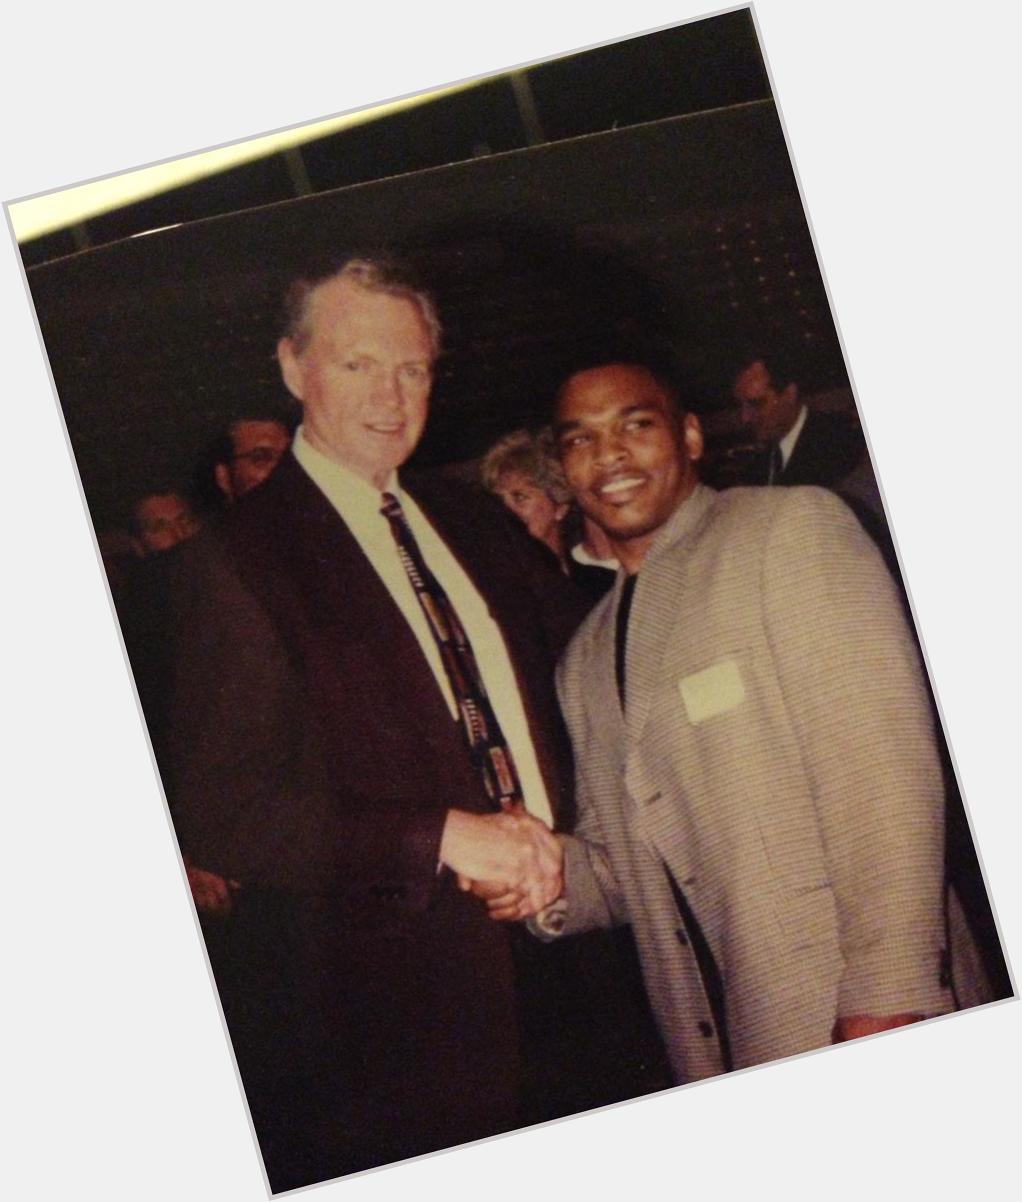 Happy Birthday to one of the Greatest football coaches and mentors. Dr. Tom Osborne 